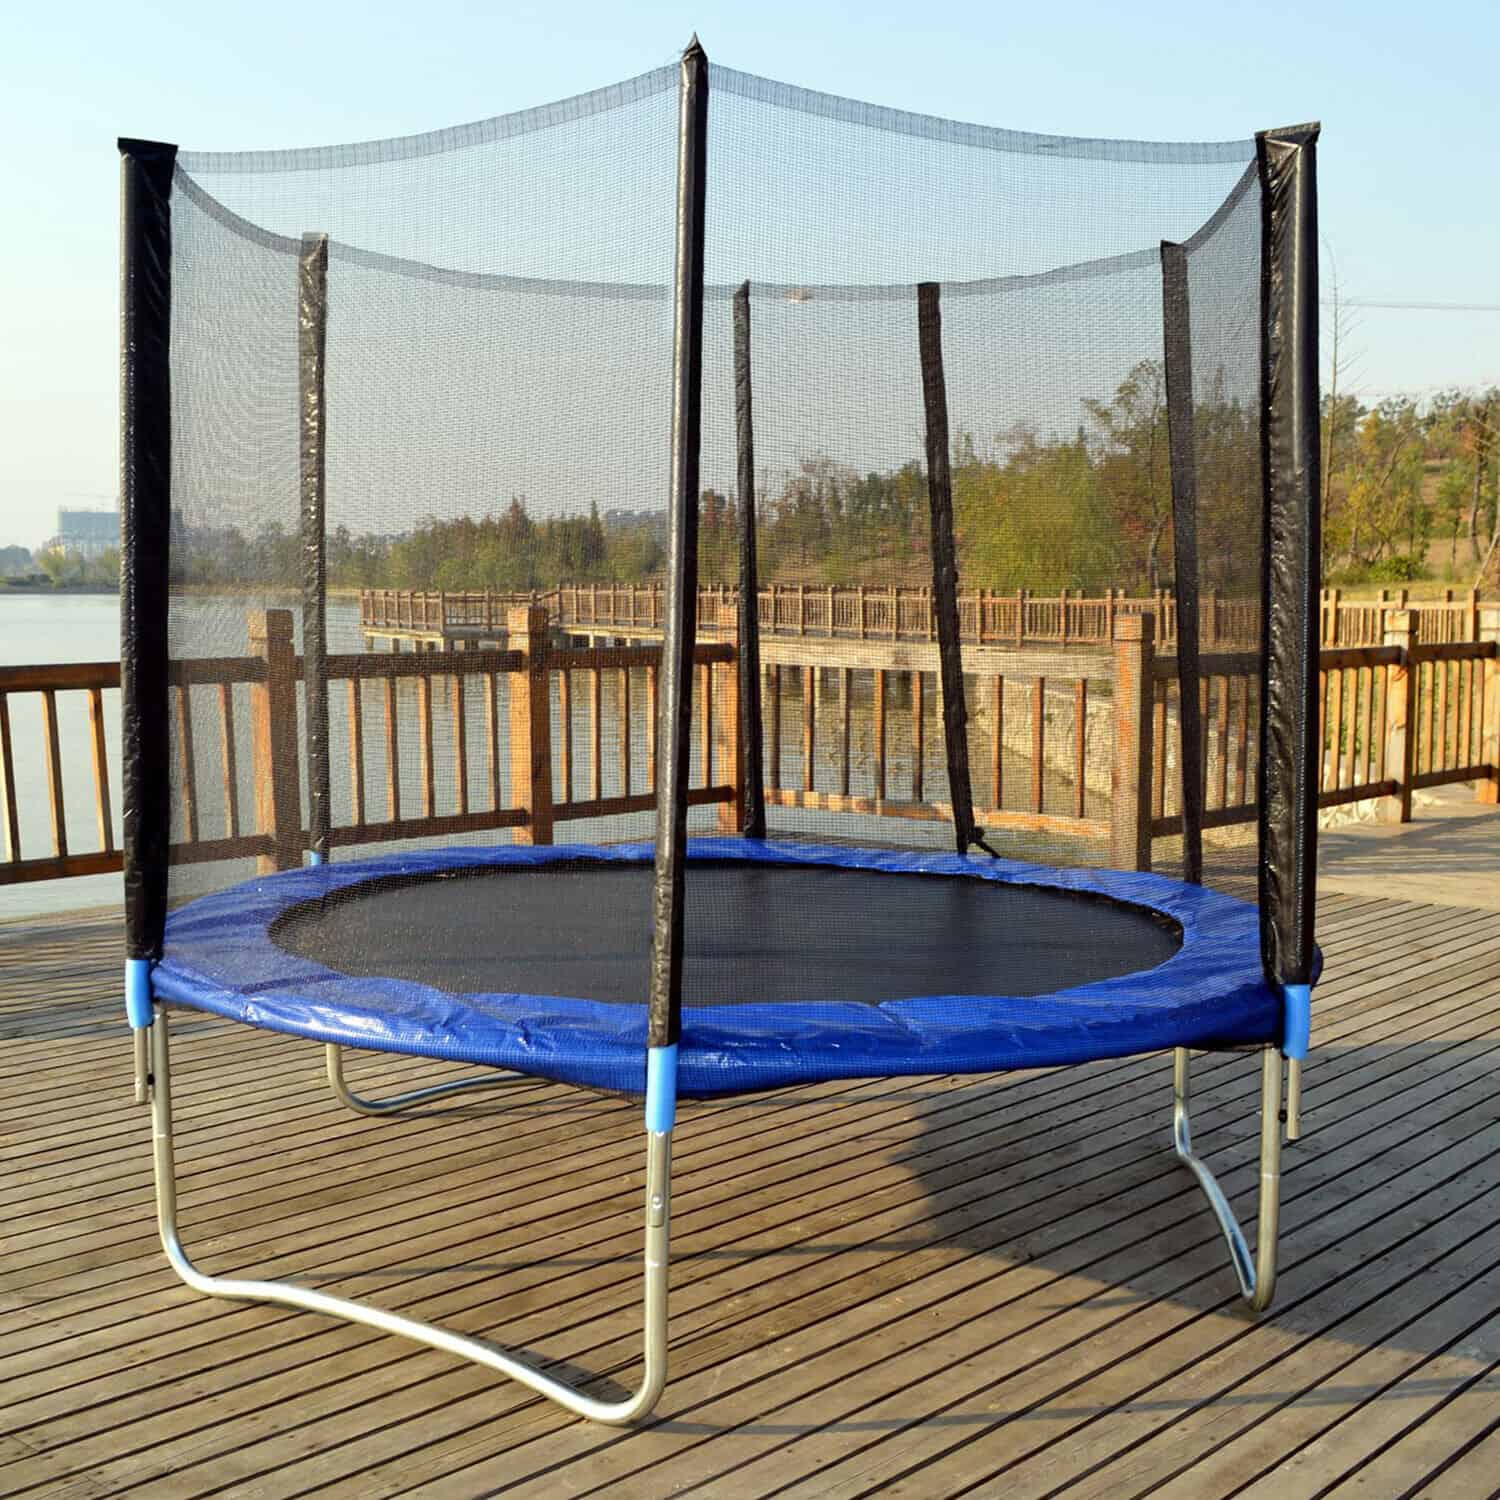 A trampoline with a net on a wooden deck.